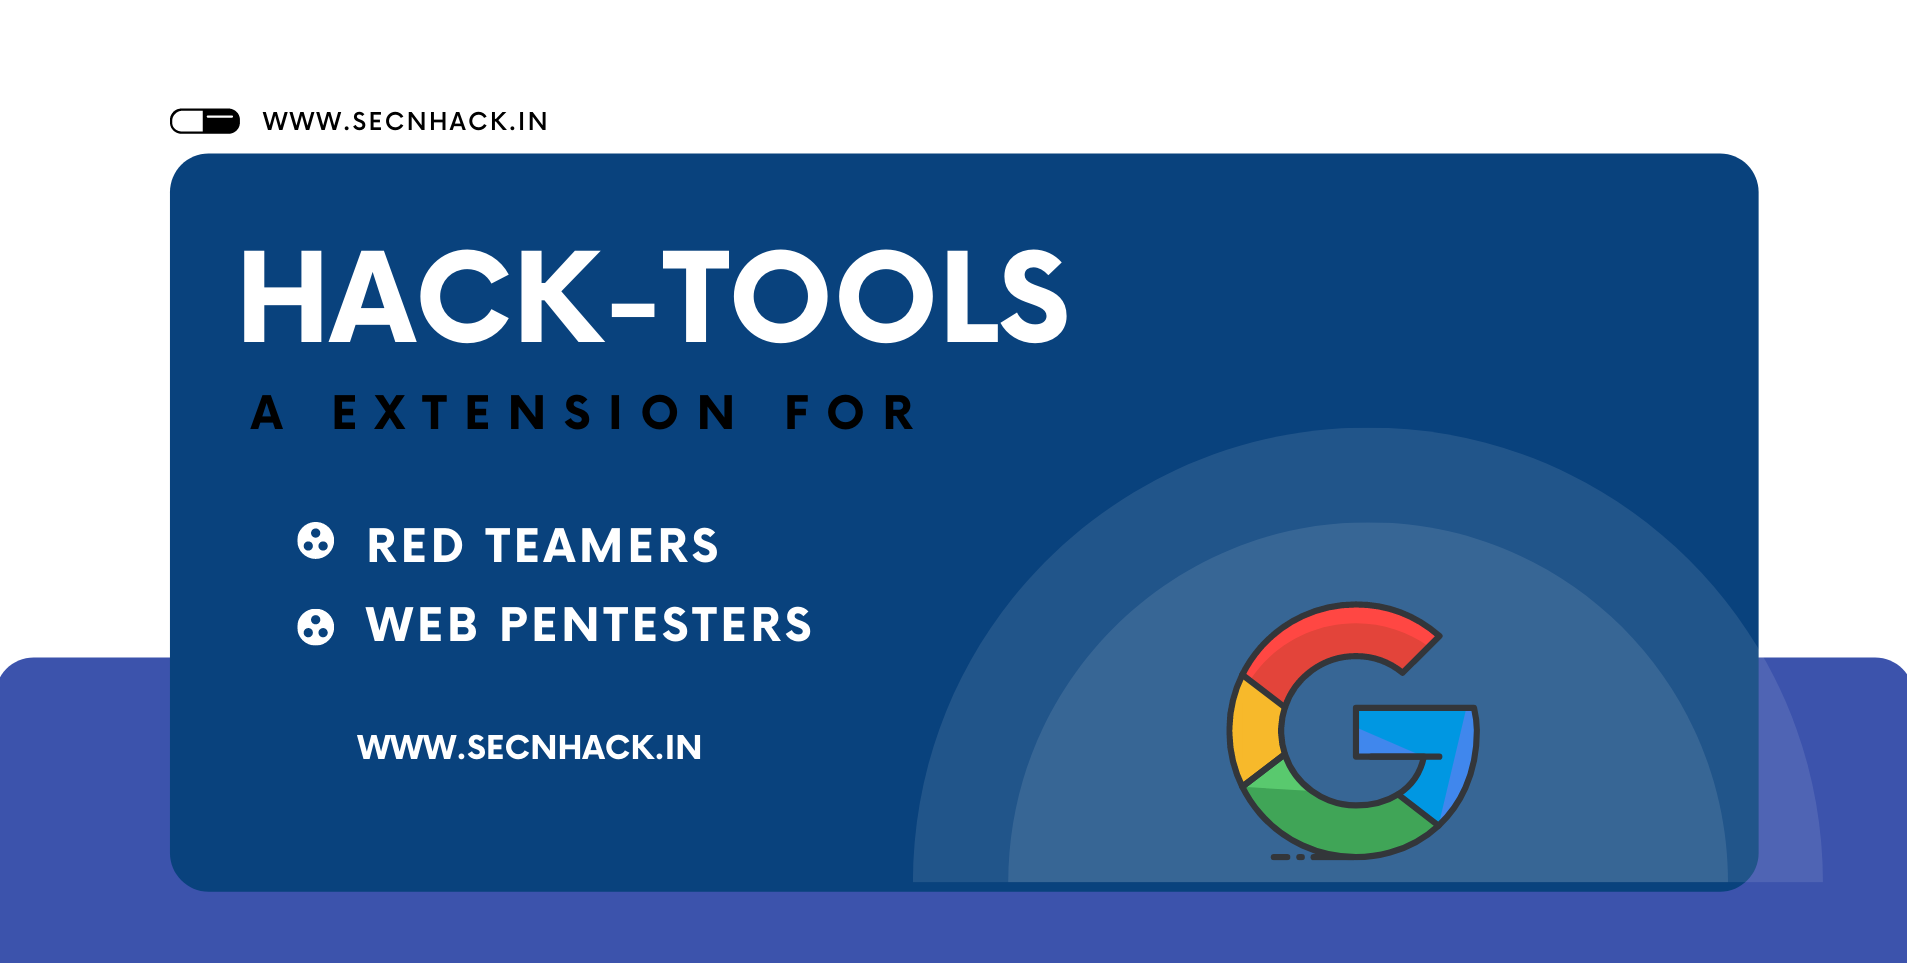 Firefox for Pentester: Hacktool - Hacking Articles